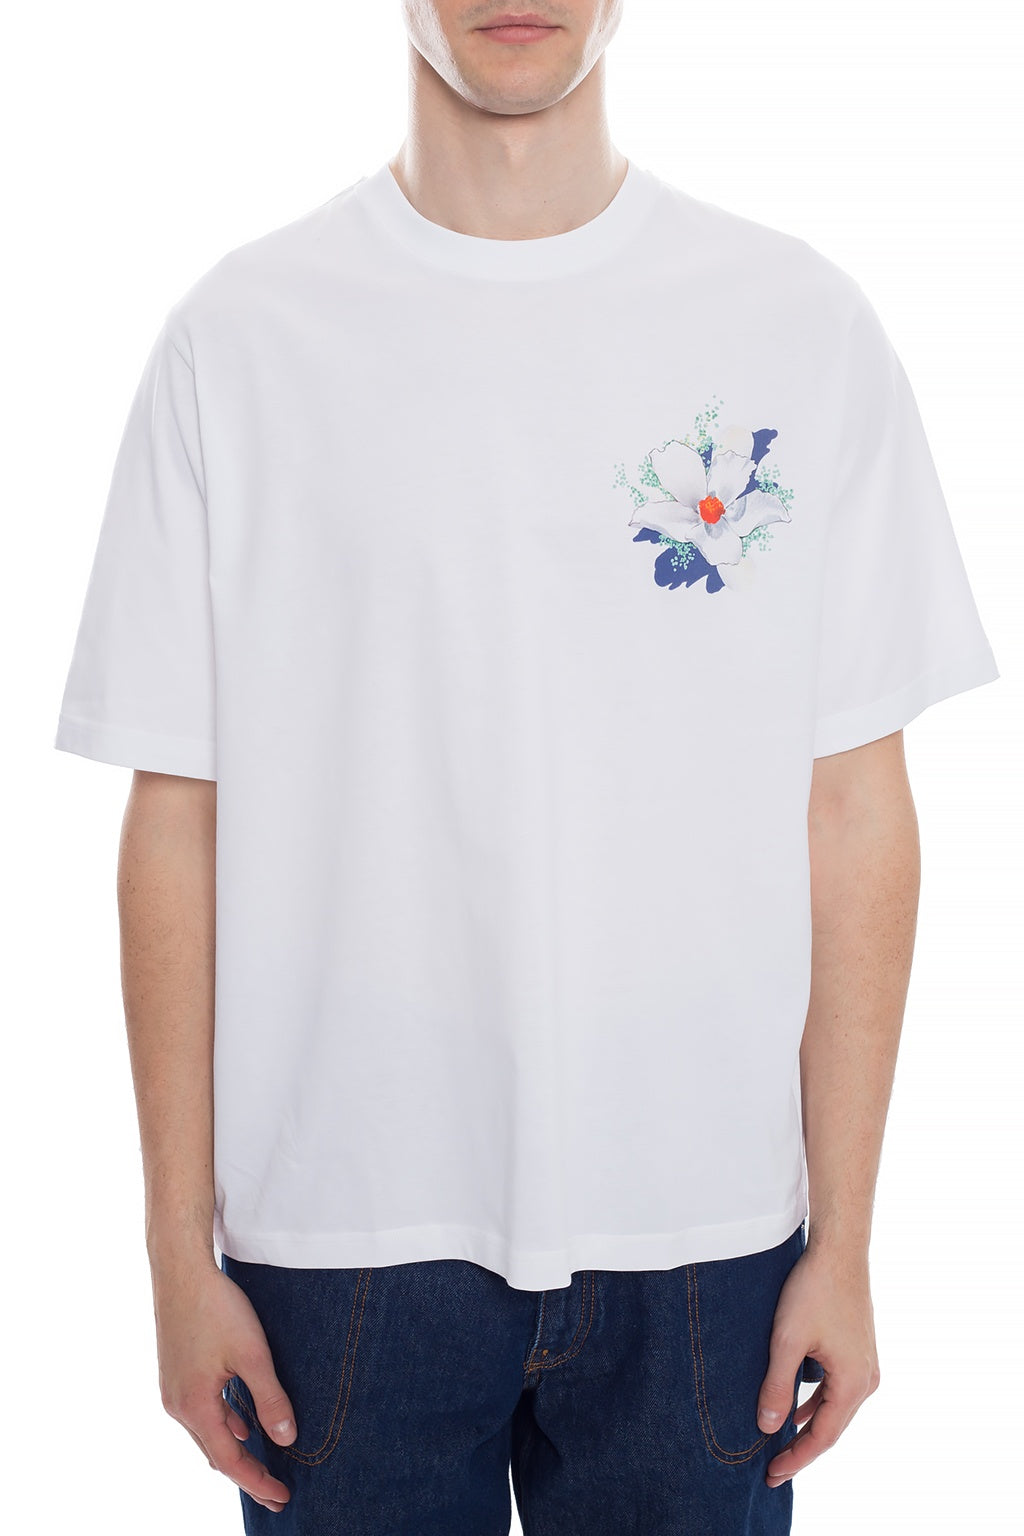 Kenzo X Vans Limited Edition Tee (New Design) - Shop Streetwear, Sneakers, Slippers and Gifts online | Malaysia - The Factory KL